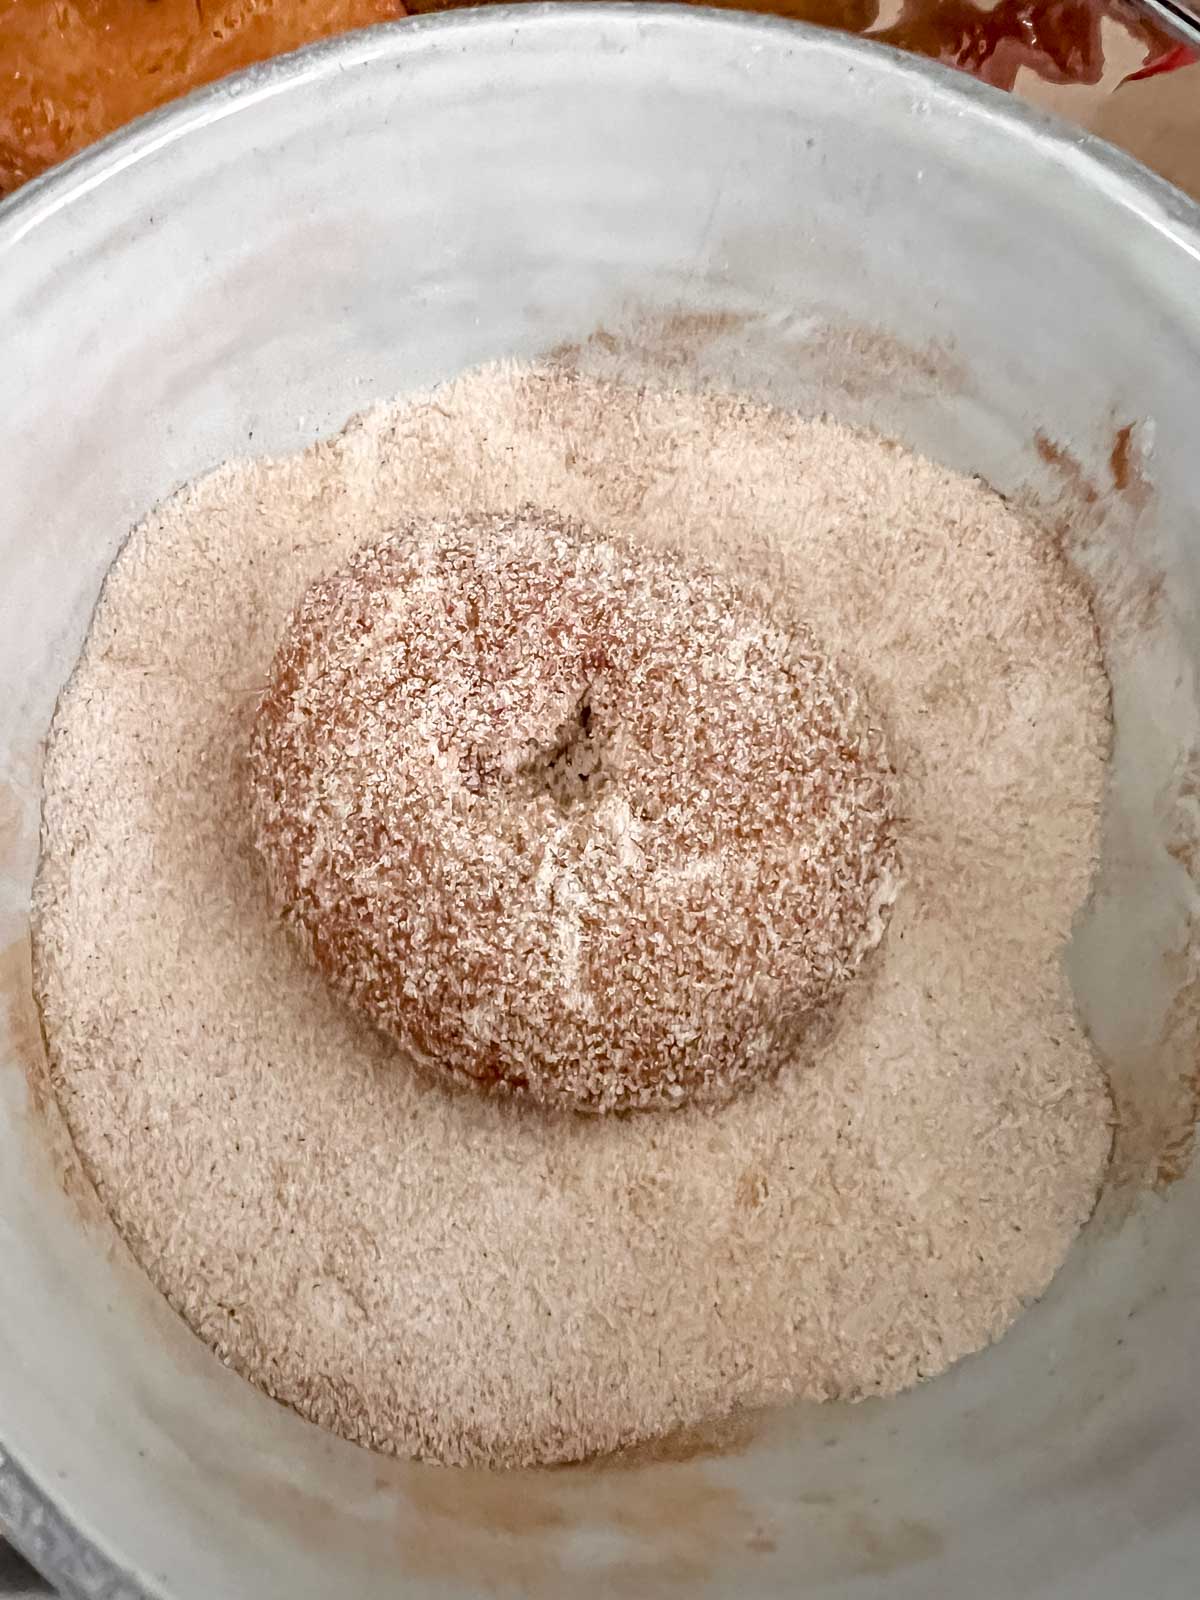 One vegan donut being dipped in the bowl of Cinnamon and sugar. 